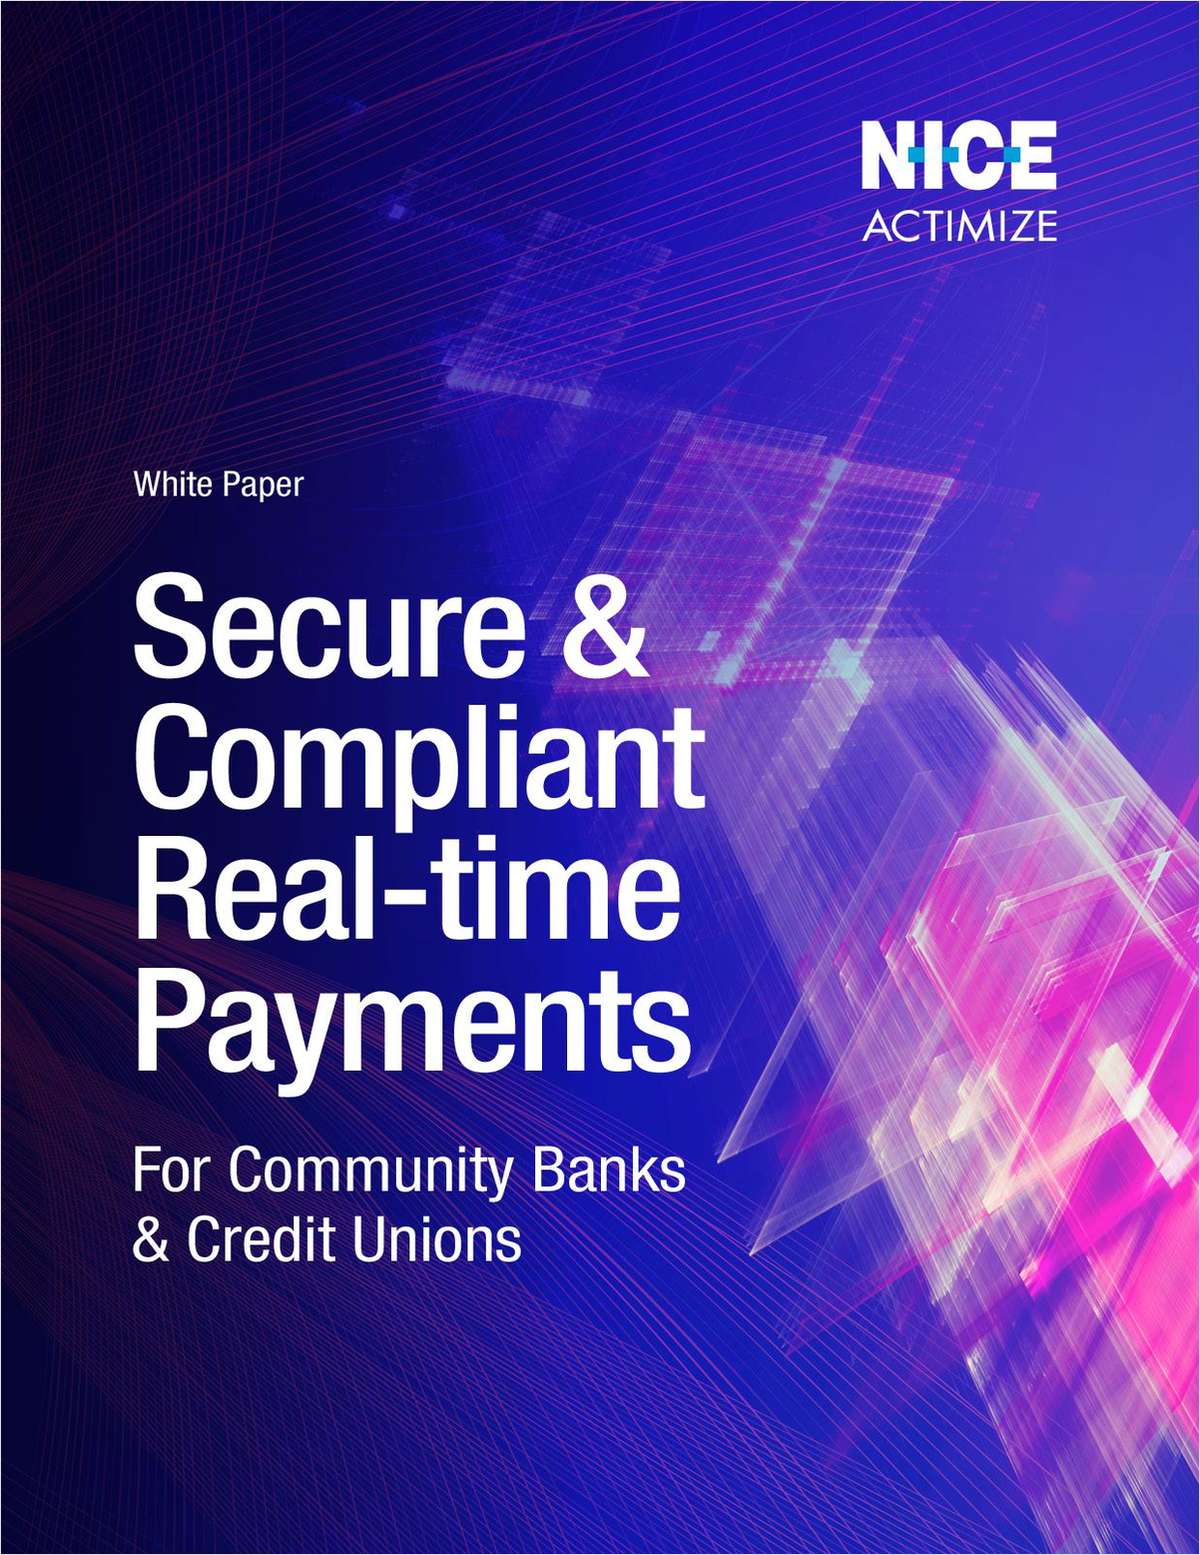 Secure and Compliant Real-time Payments for Credit Unions